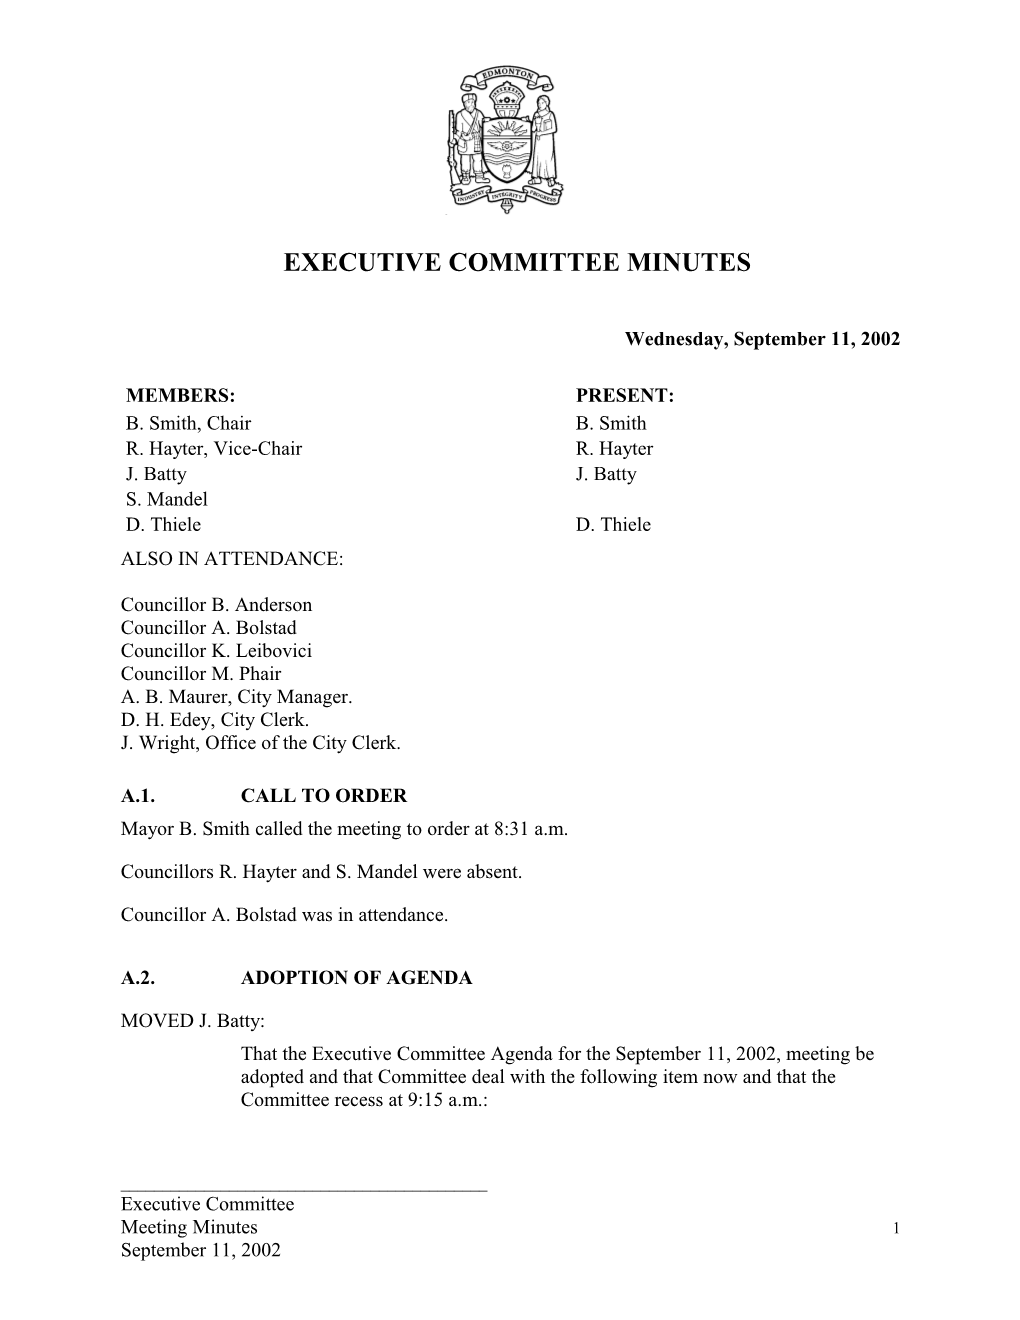 Minutes for Executive Committee September 11, 2002 Meeting